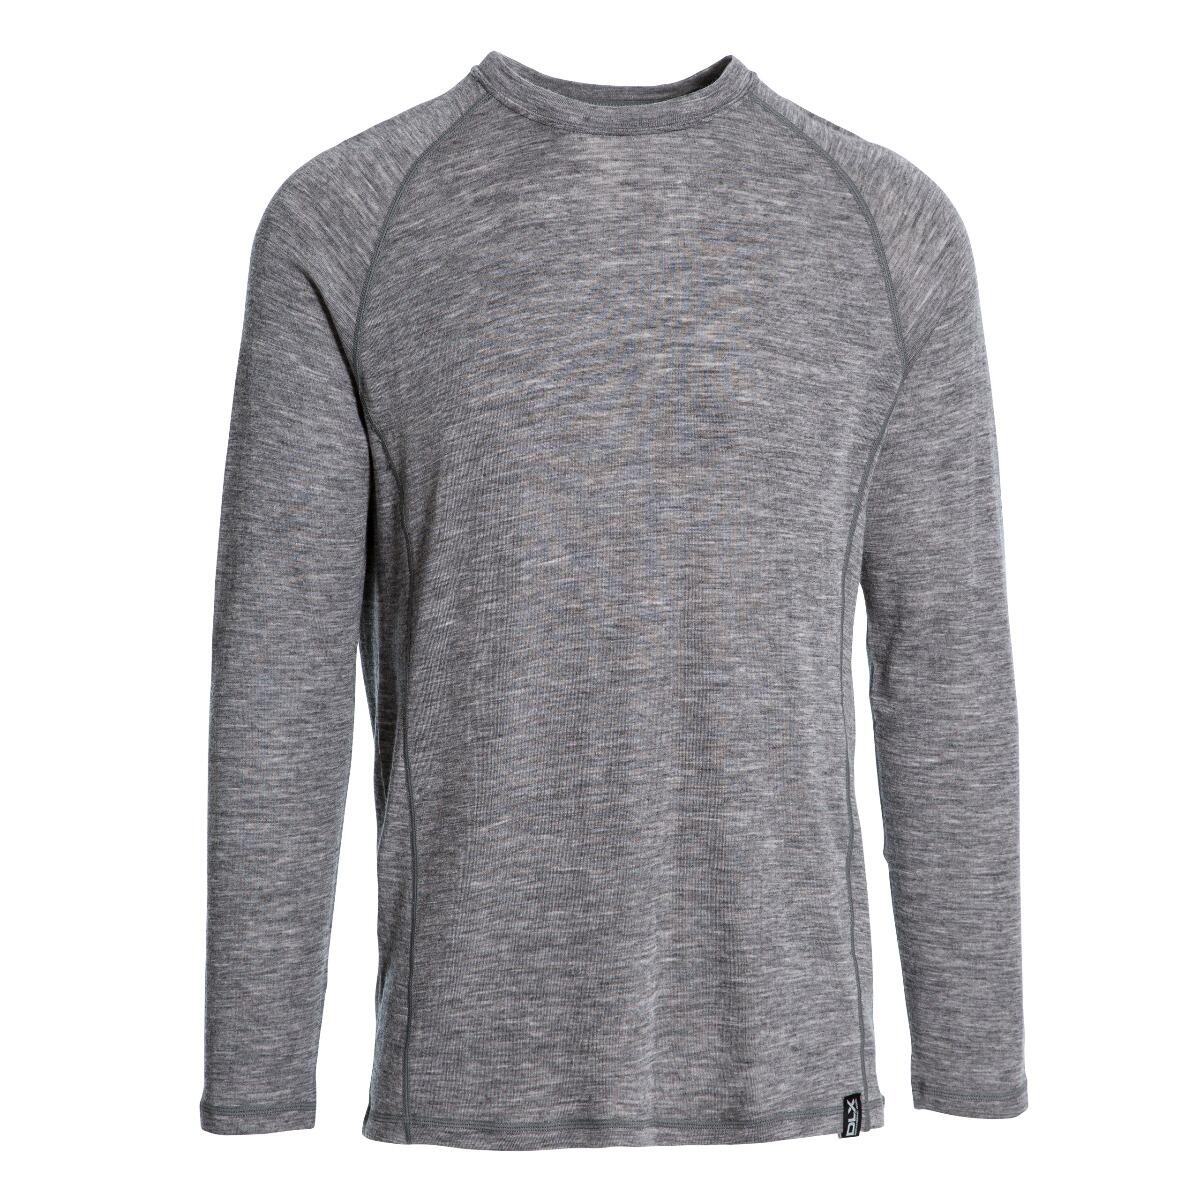 DLX Mens Base Layer Top Long Sleeve Thermal Quick Dry Round Neck Wexler